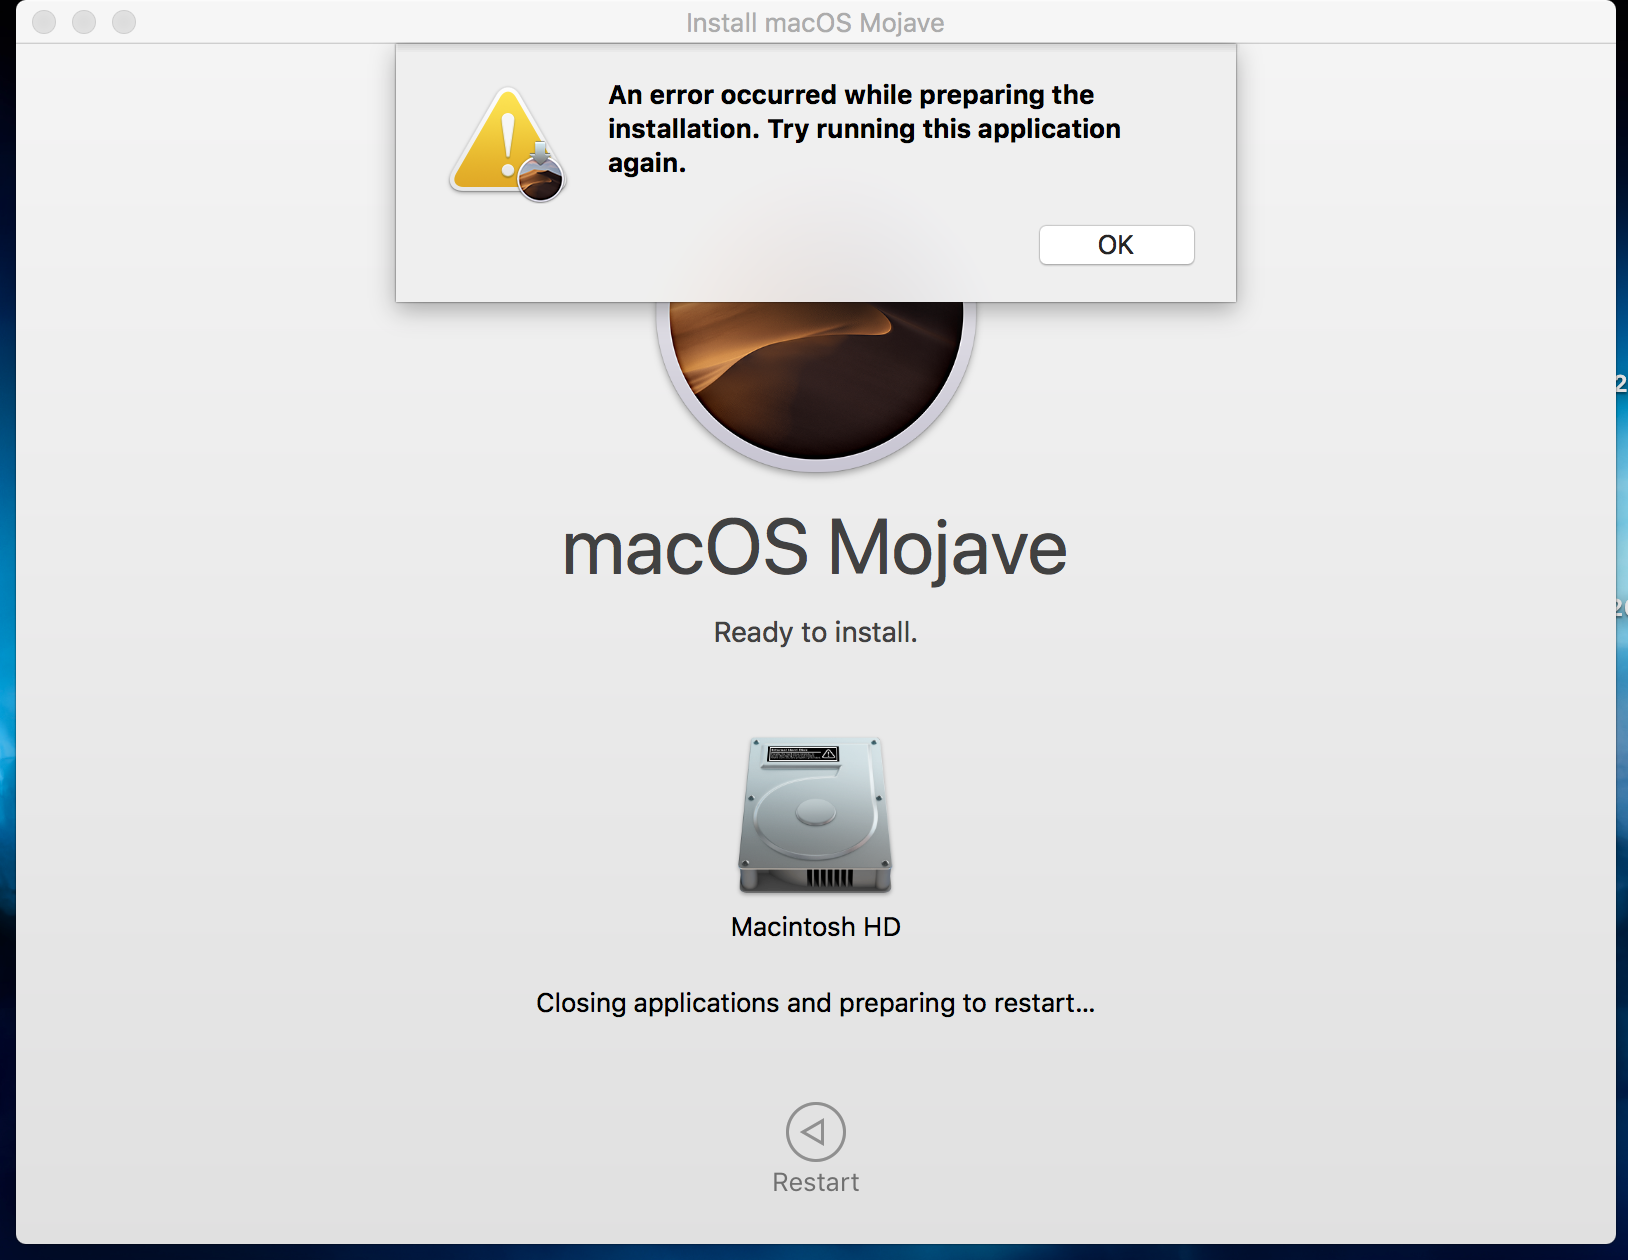 Can I Delete Install Macos Mojave.app